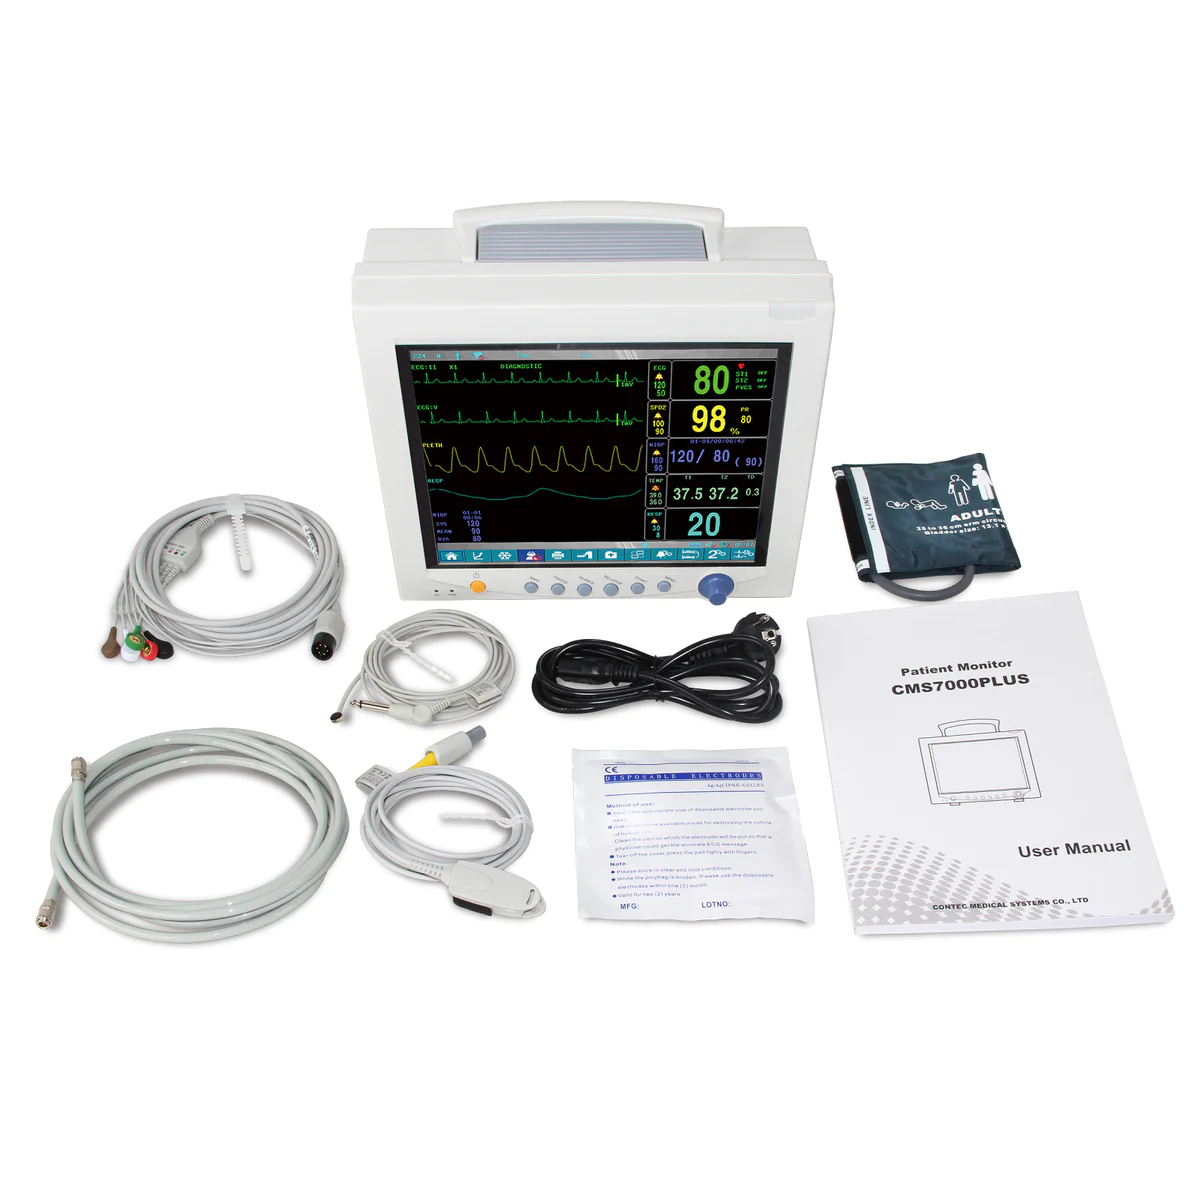 PATIENT MONITOR CMS 7000 Price in Pakistan